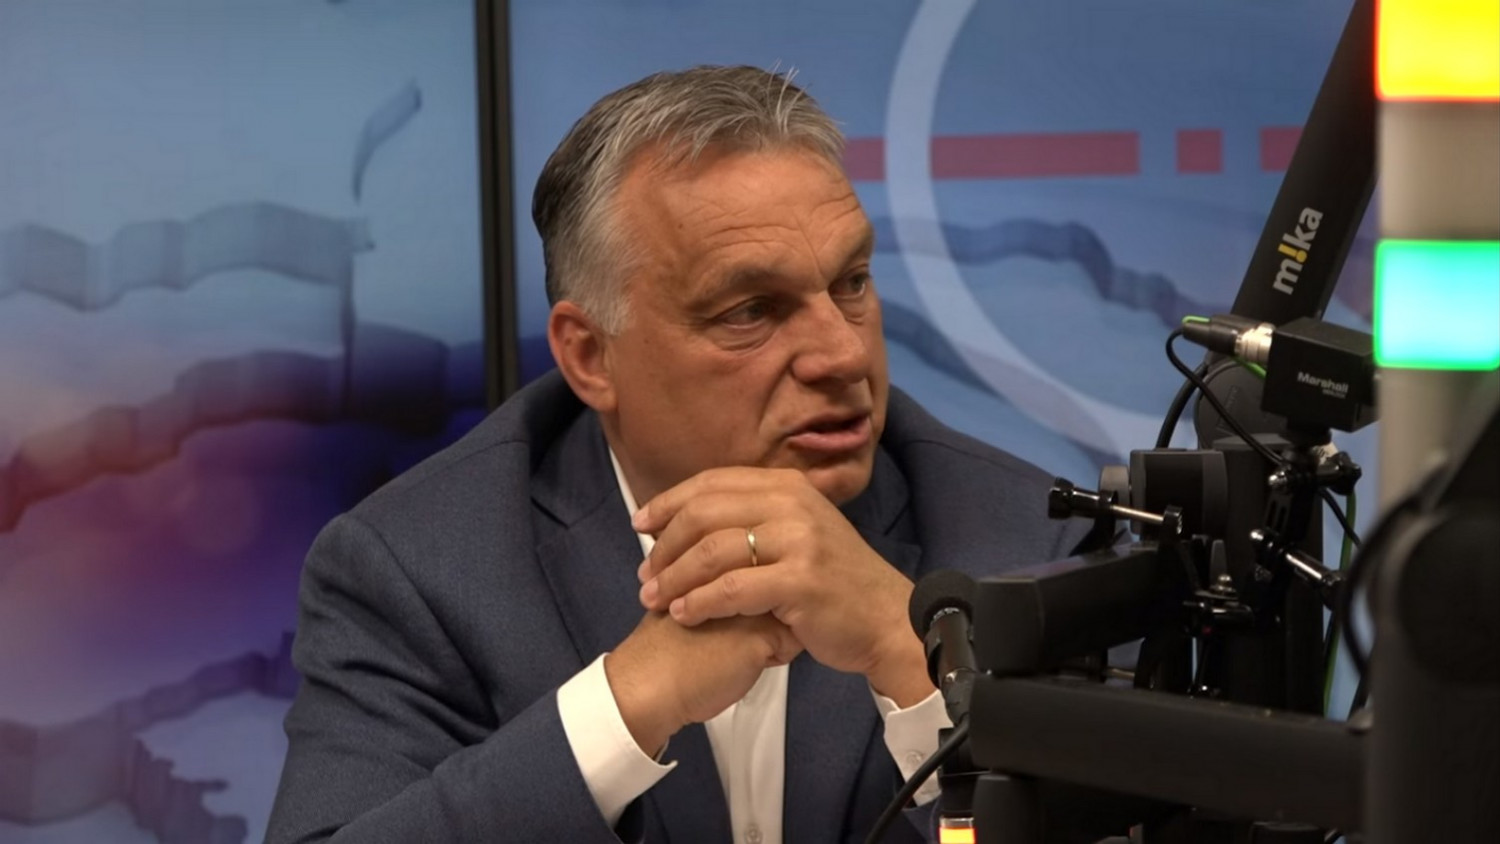 According to Viktor Orban, the past 100 years have not been as successful as they are now